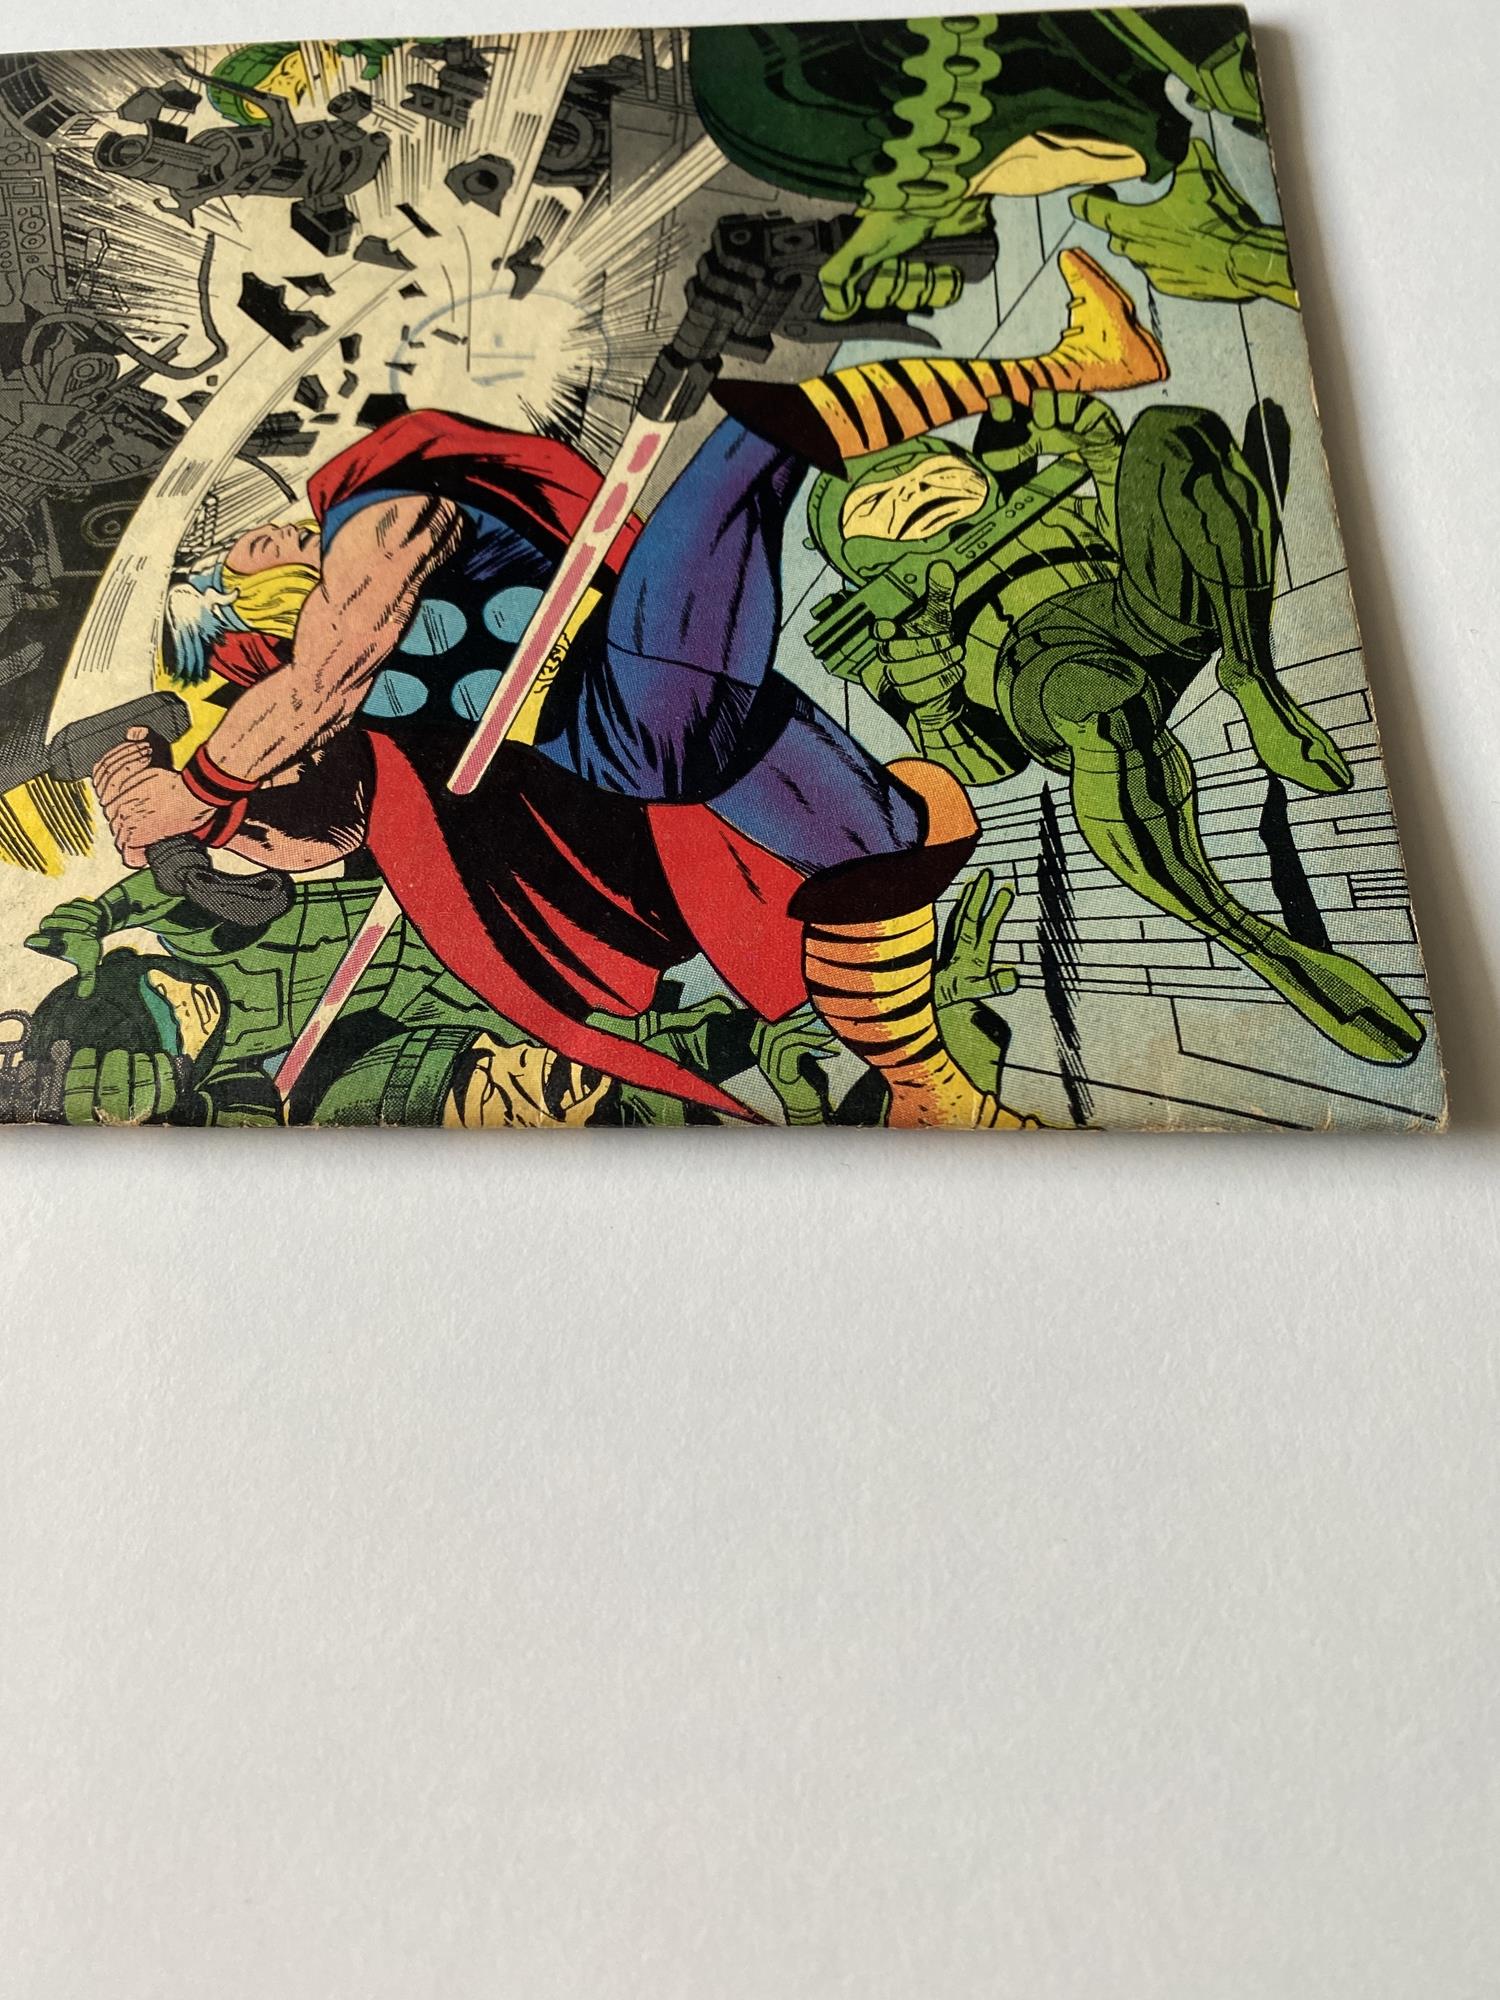 THOR # 132 (1966 - MARVEL - Cents Copy with Pence Stamp) - First appearance of Ego the Living Planet - Image 7 of 7